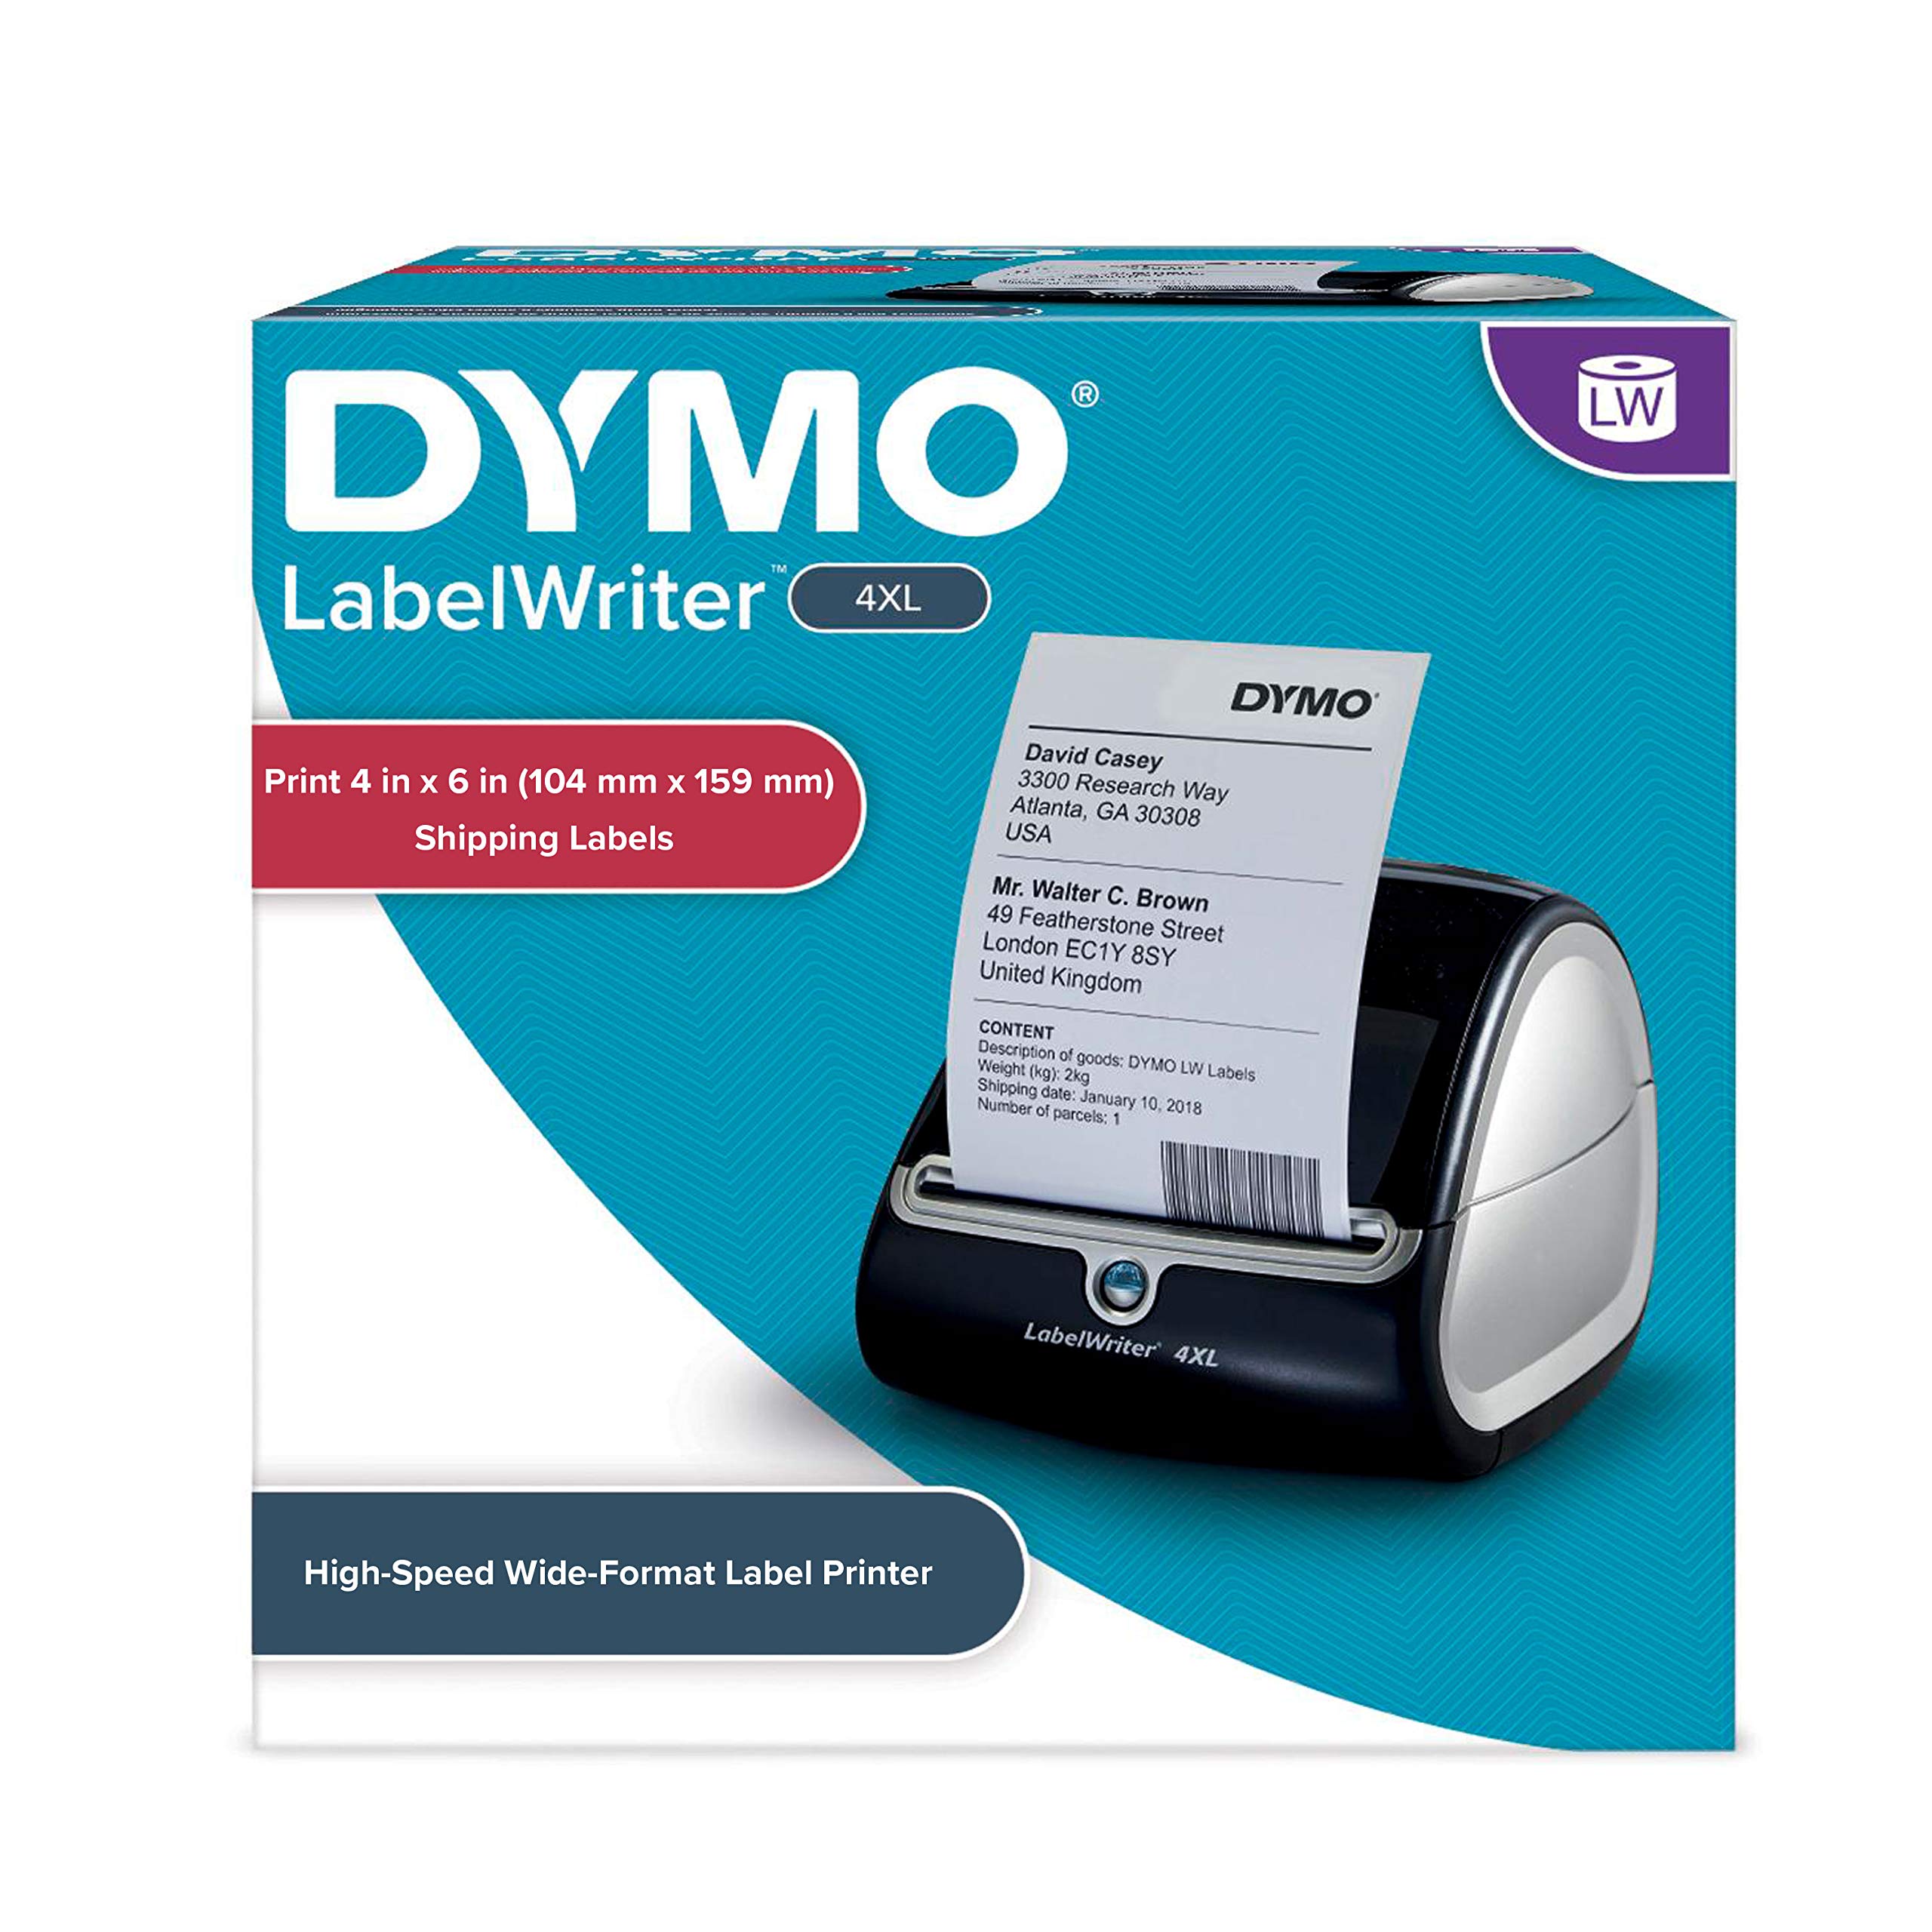 Print Labels On A Mac Free Software